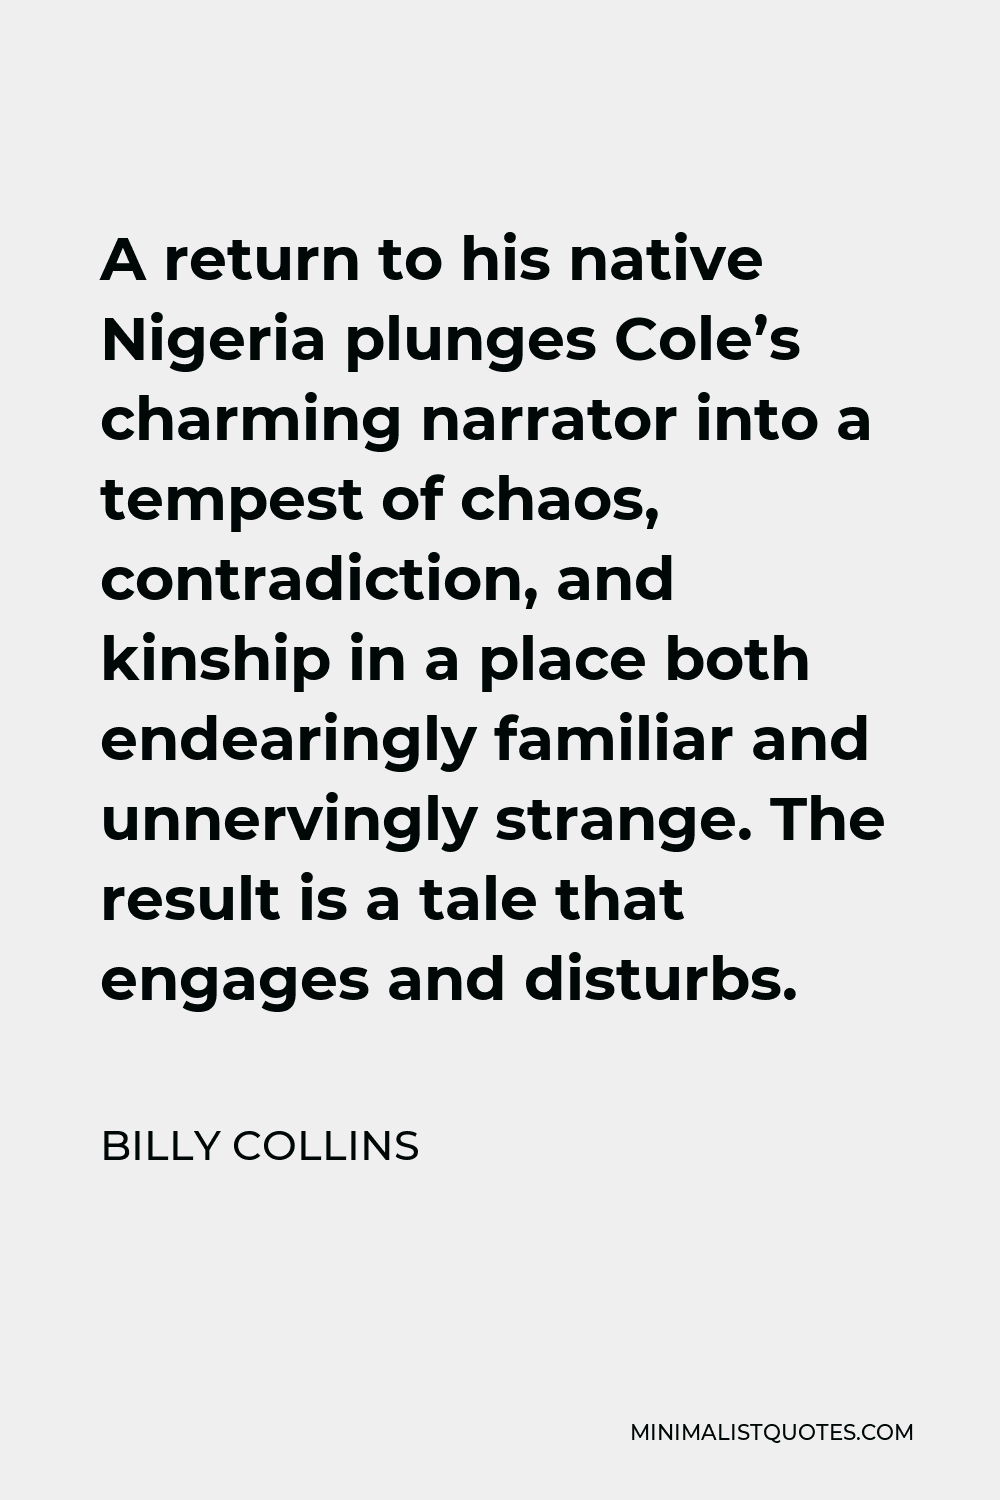 Billy Collins Quote - A return to his native Nigeria plunges Cole’s charming narrator into a tempest of chaos, contradiction, and kinship in a place both endearingly familiar and unnervingly strange. The result is a tale that engages and disturbs.